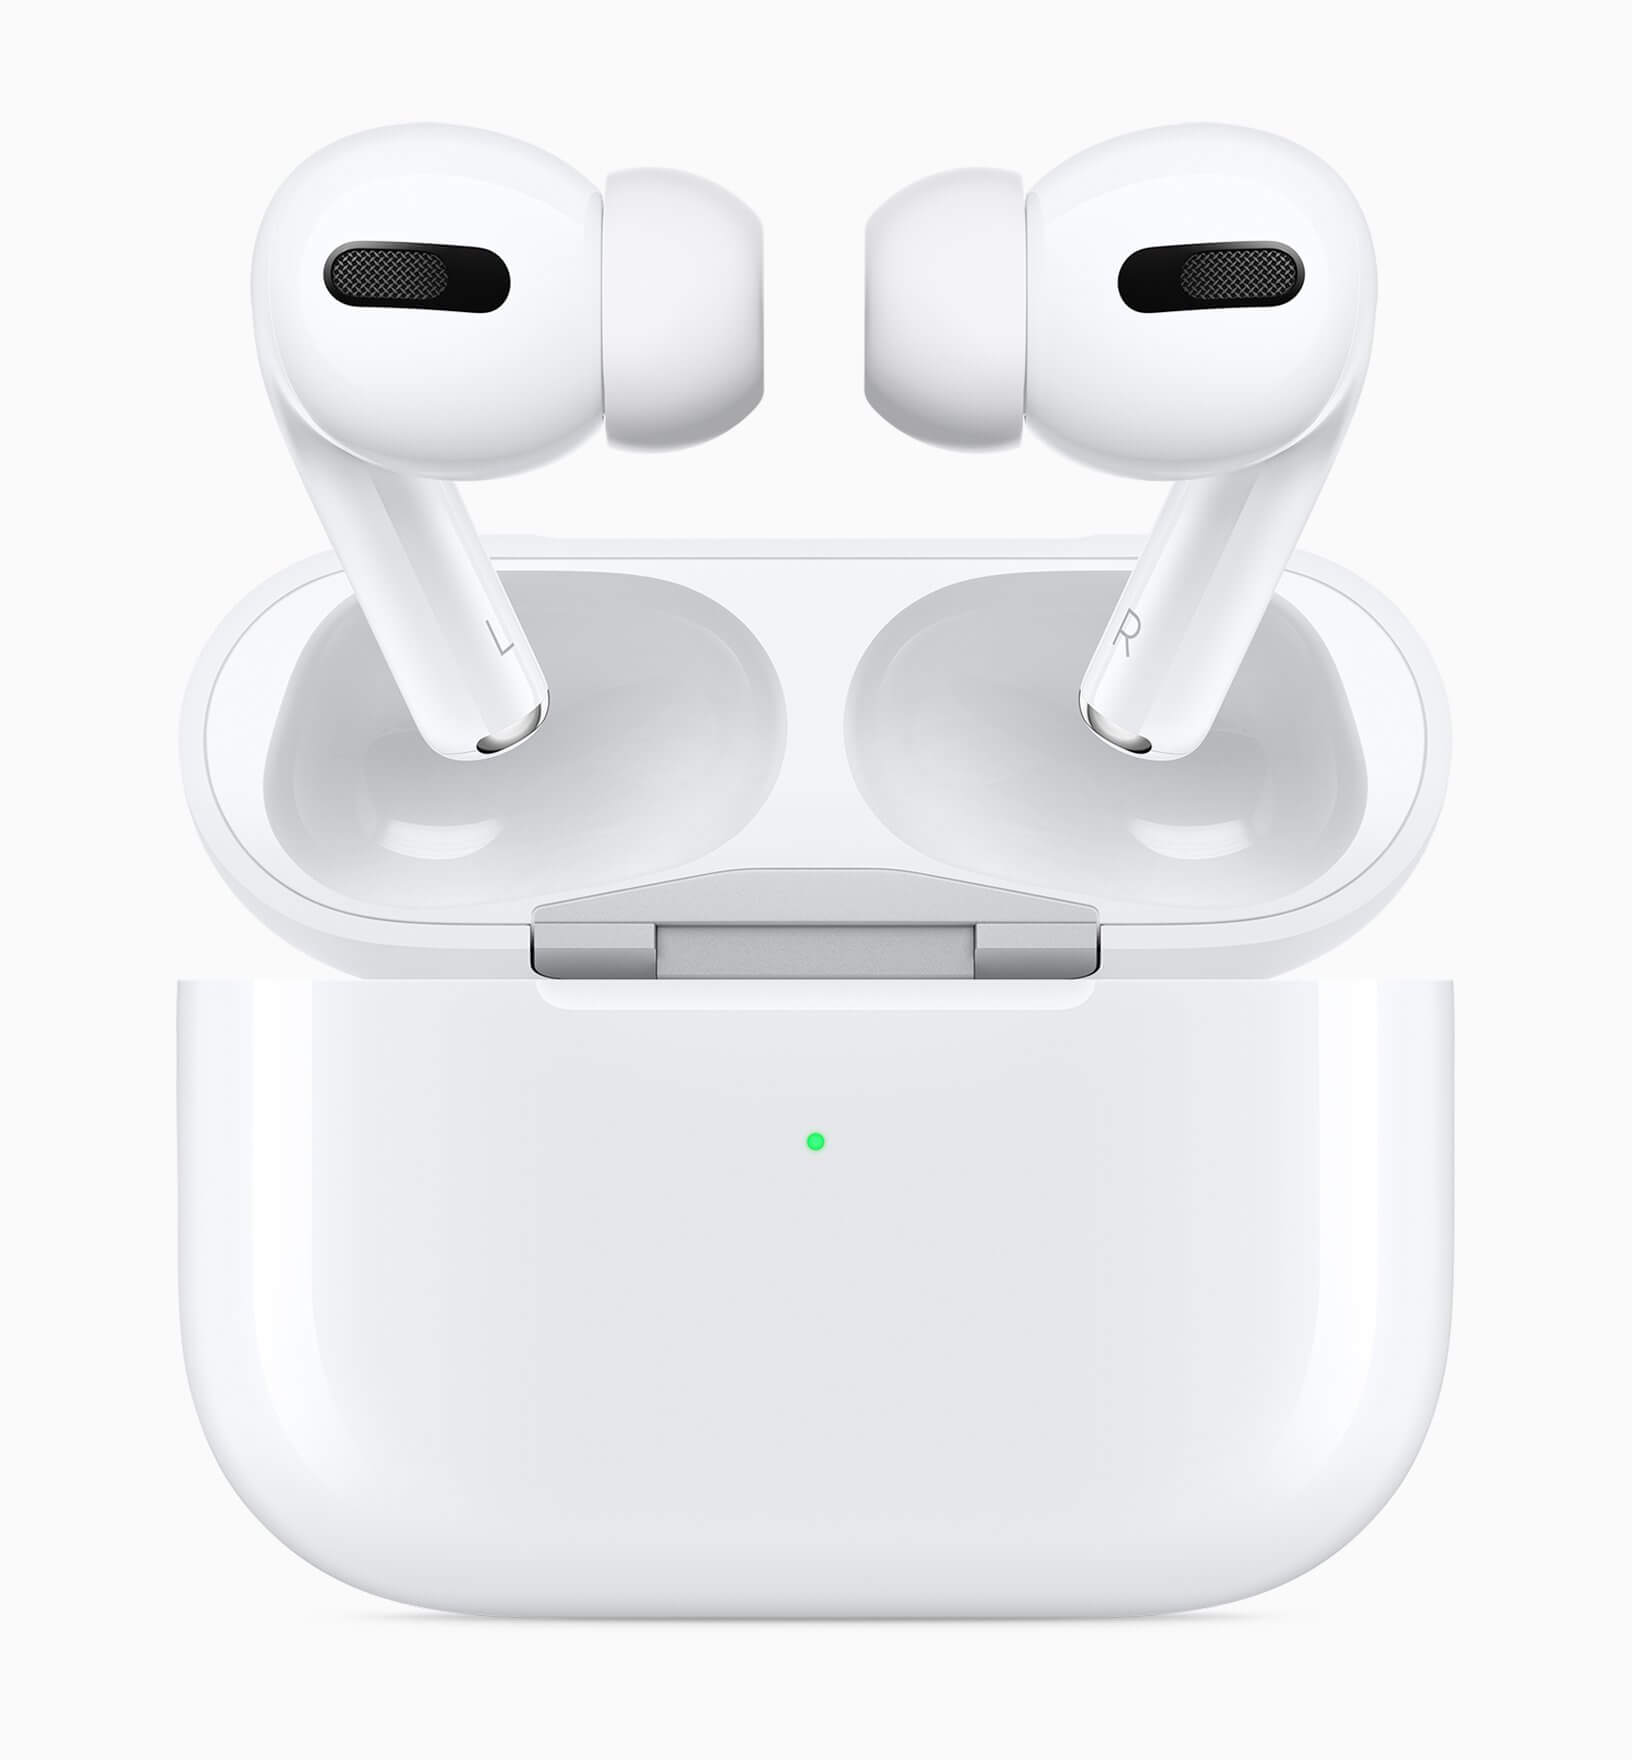 Apple Airpod Pro Review & Price in Nigeria